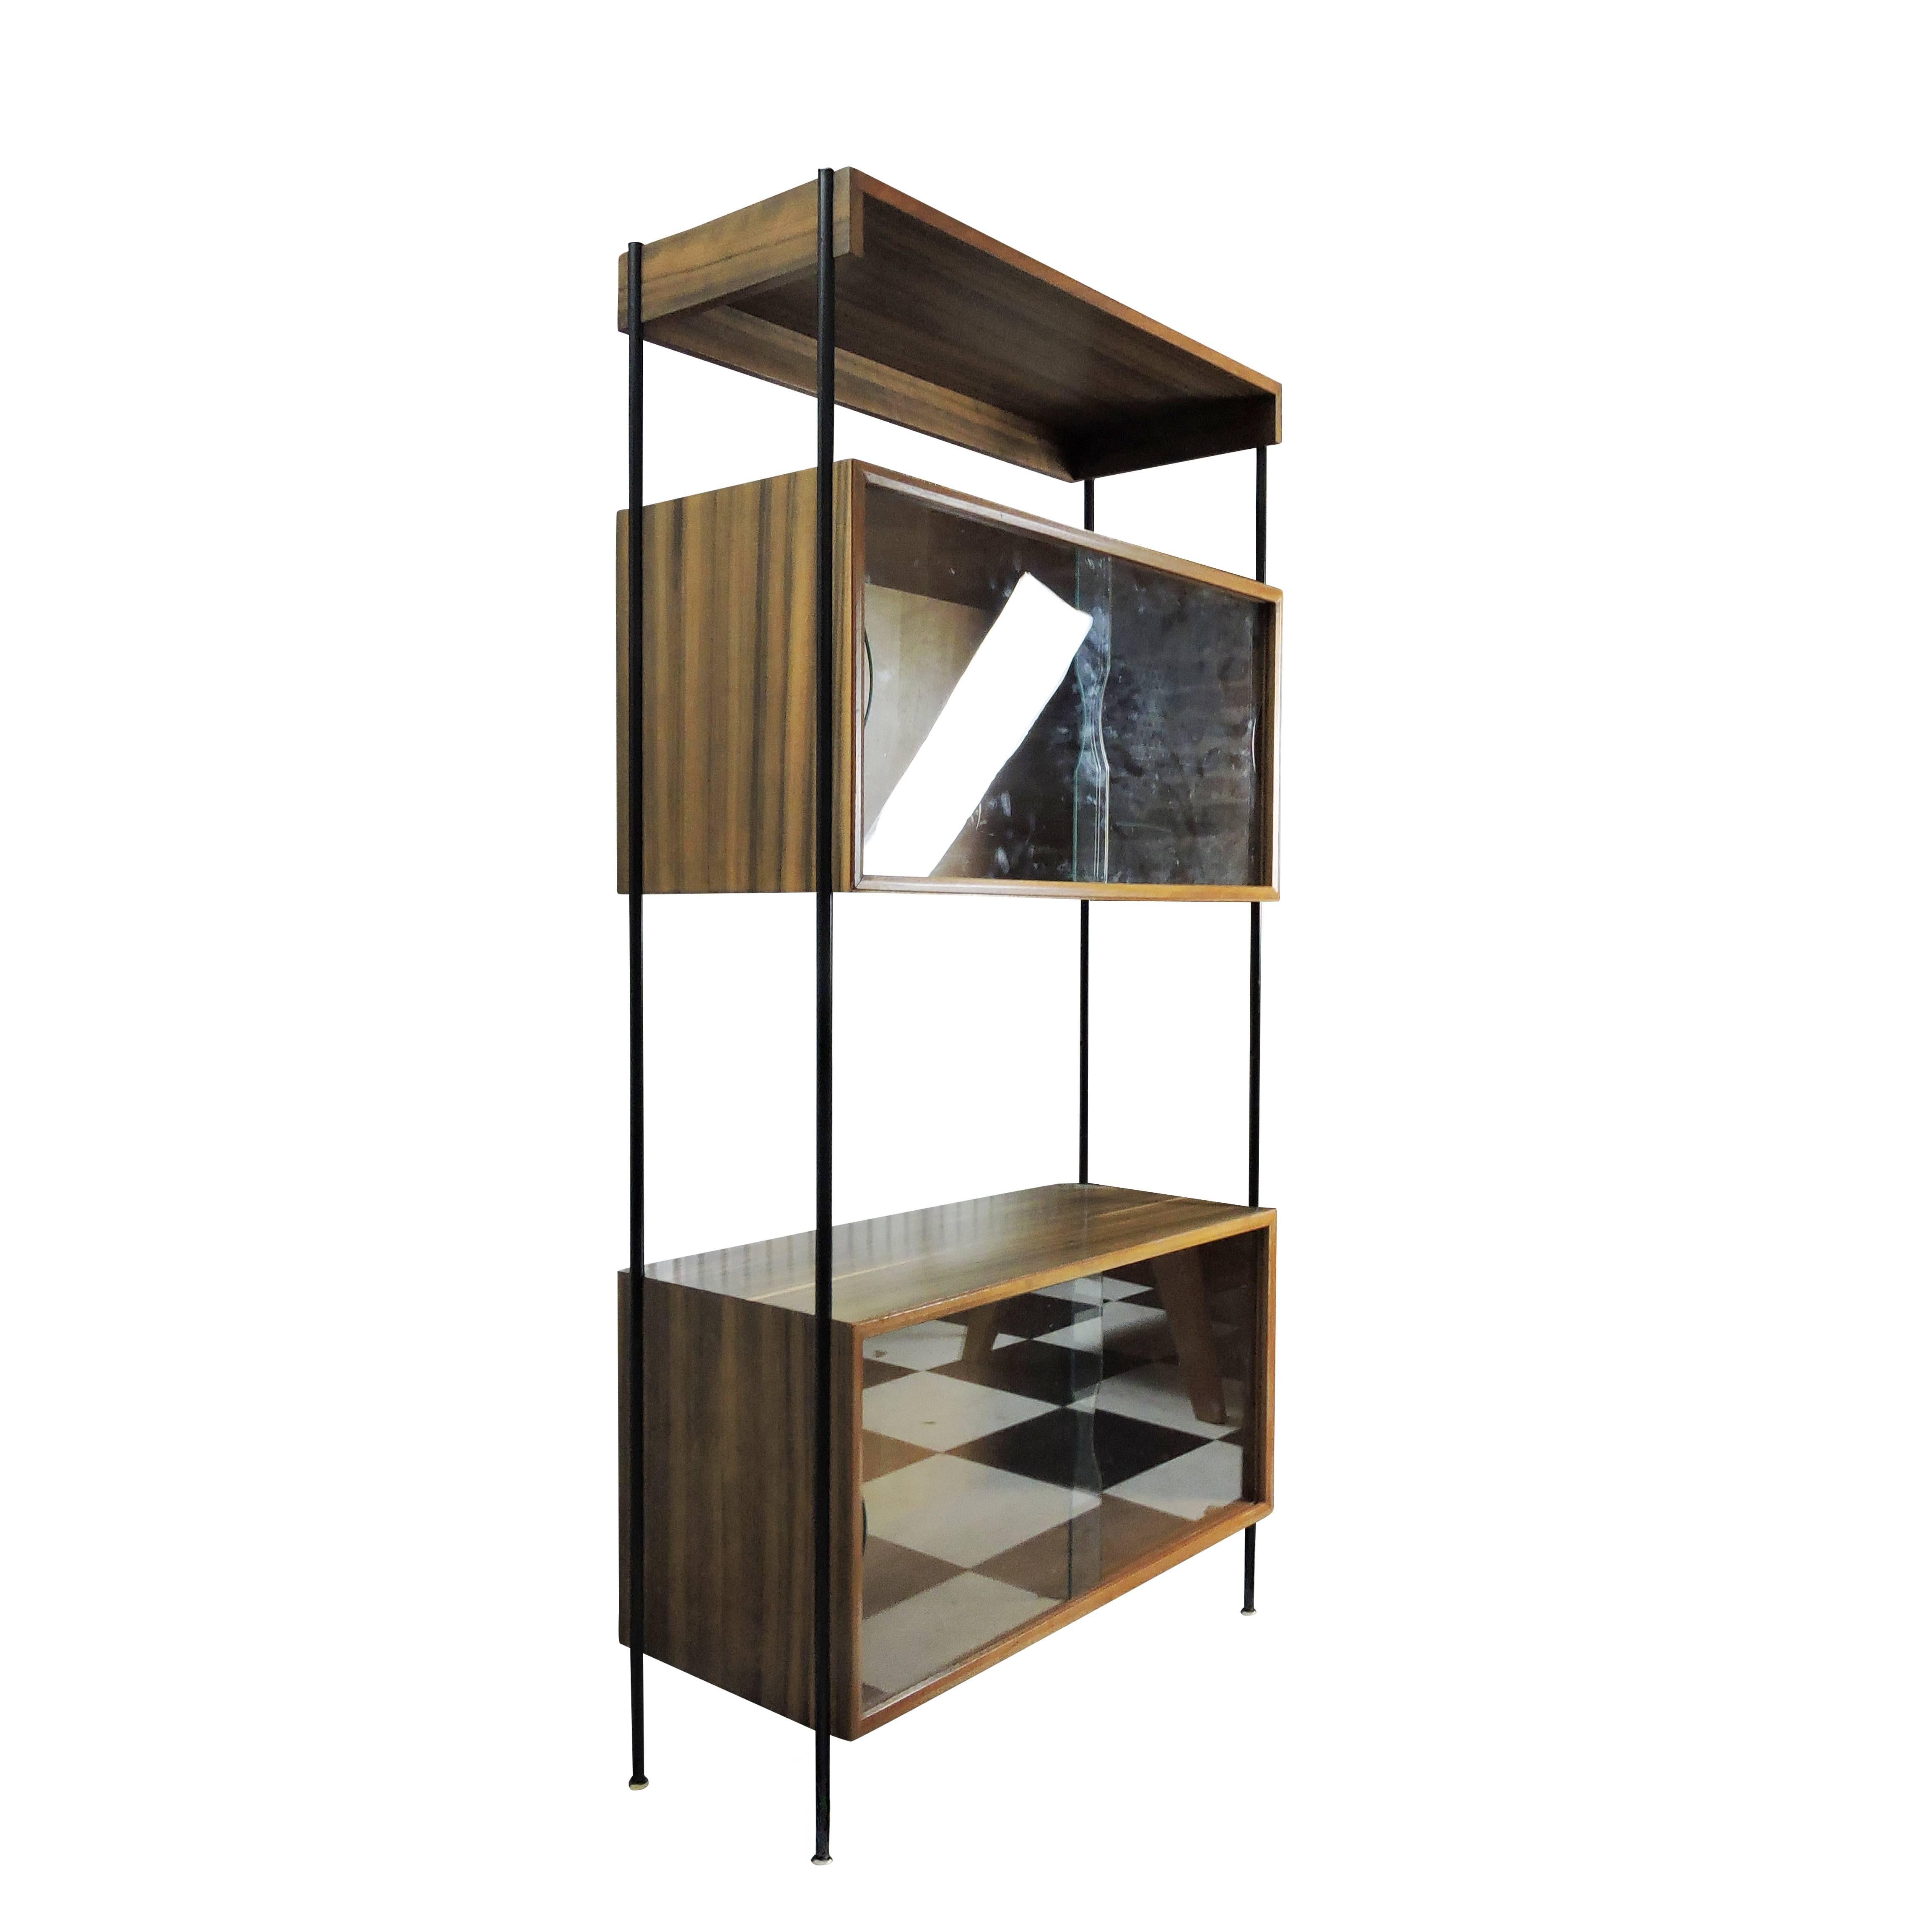 This marked Vanson modular unit features a black powder coated steel frame and afrormosia shelves. The cabinets include two glass double sliding doors each.

     